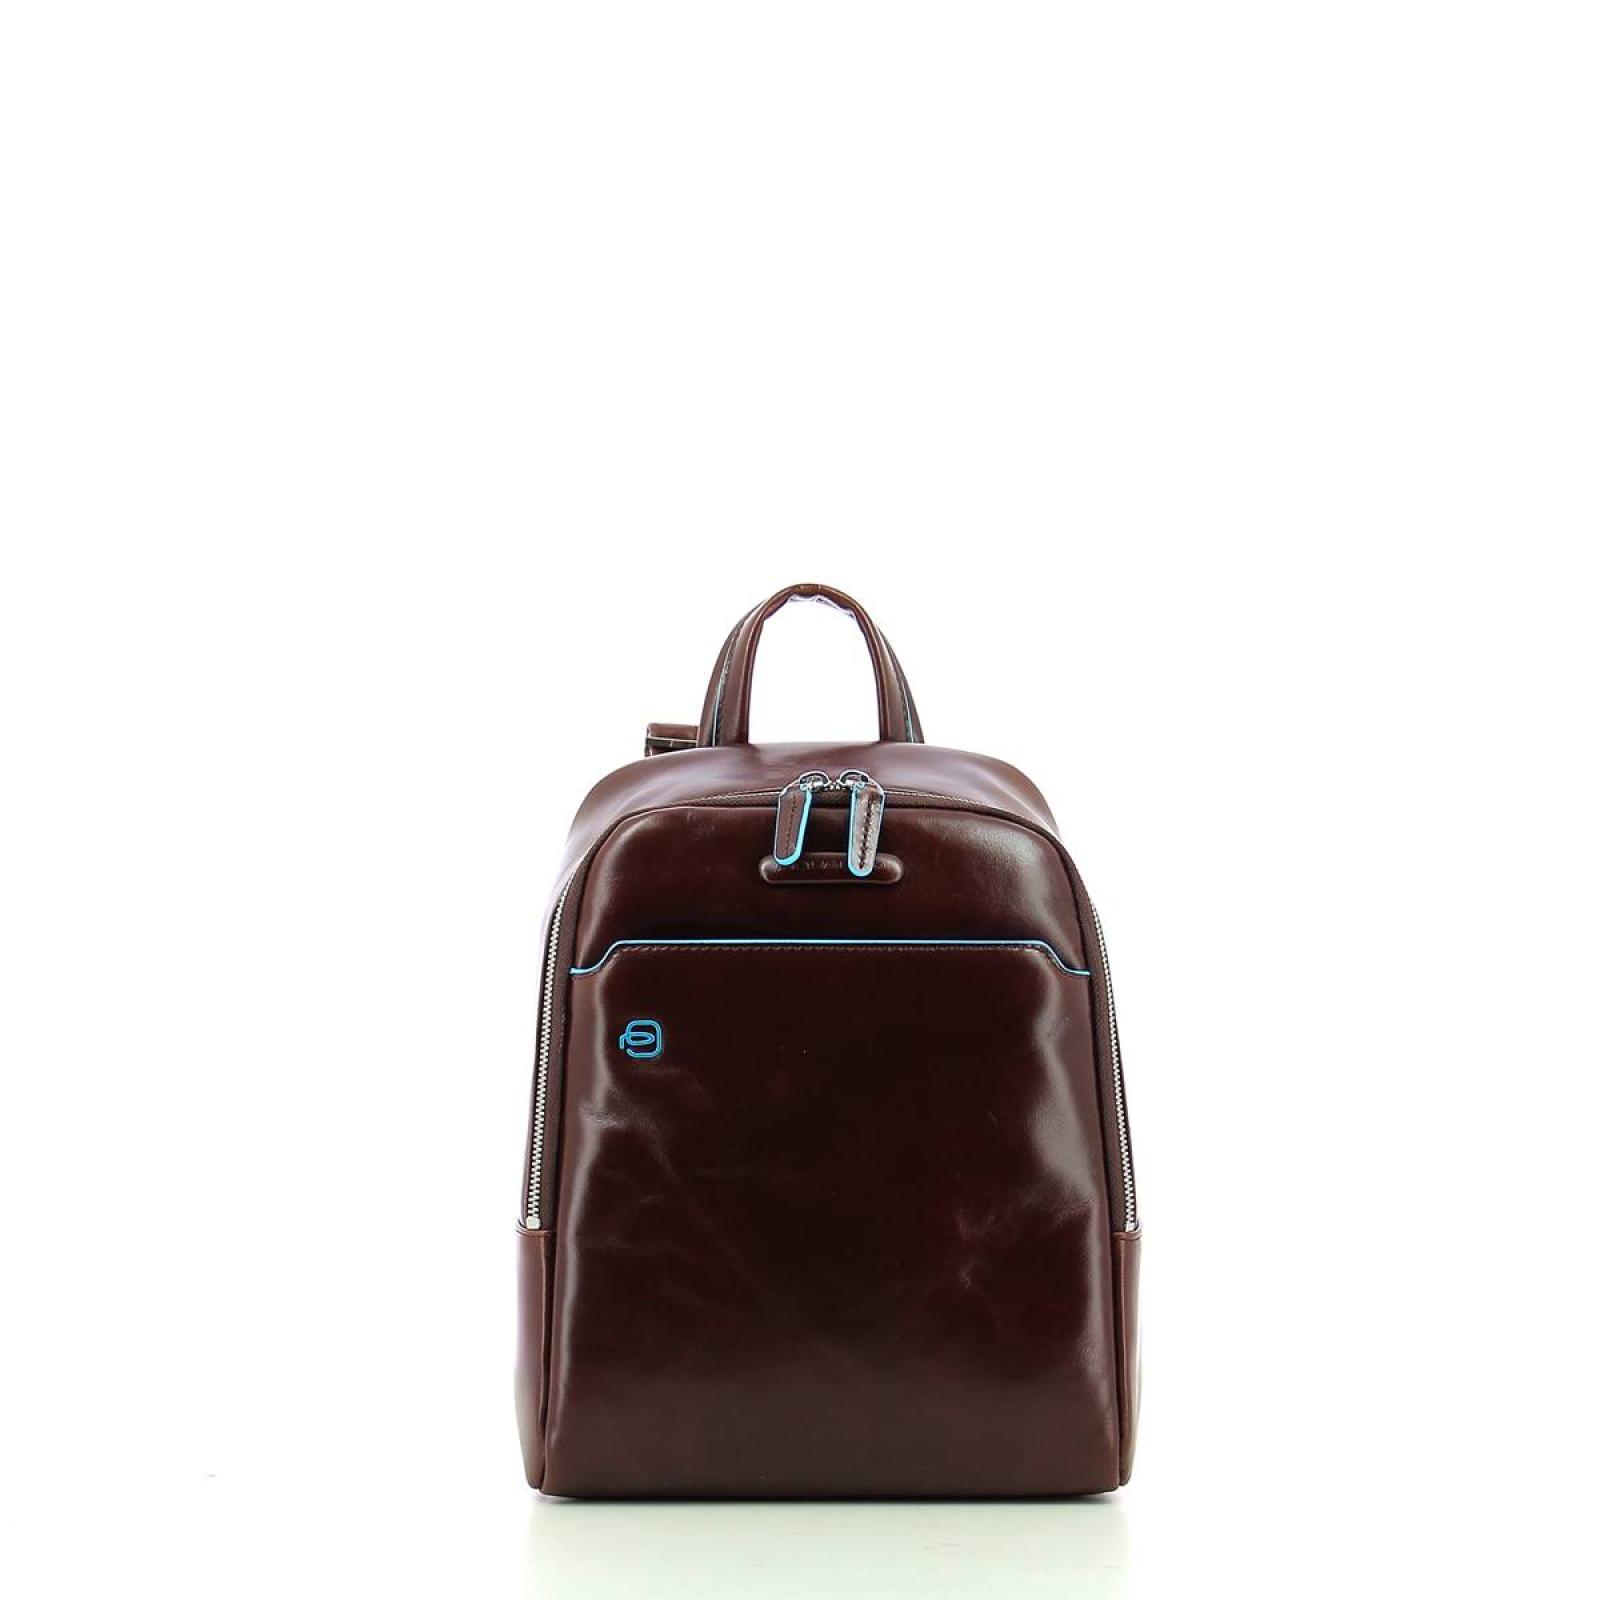 Small size backpack Blue Square-MO-UN